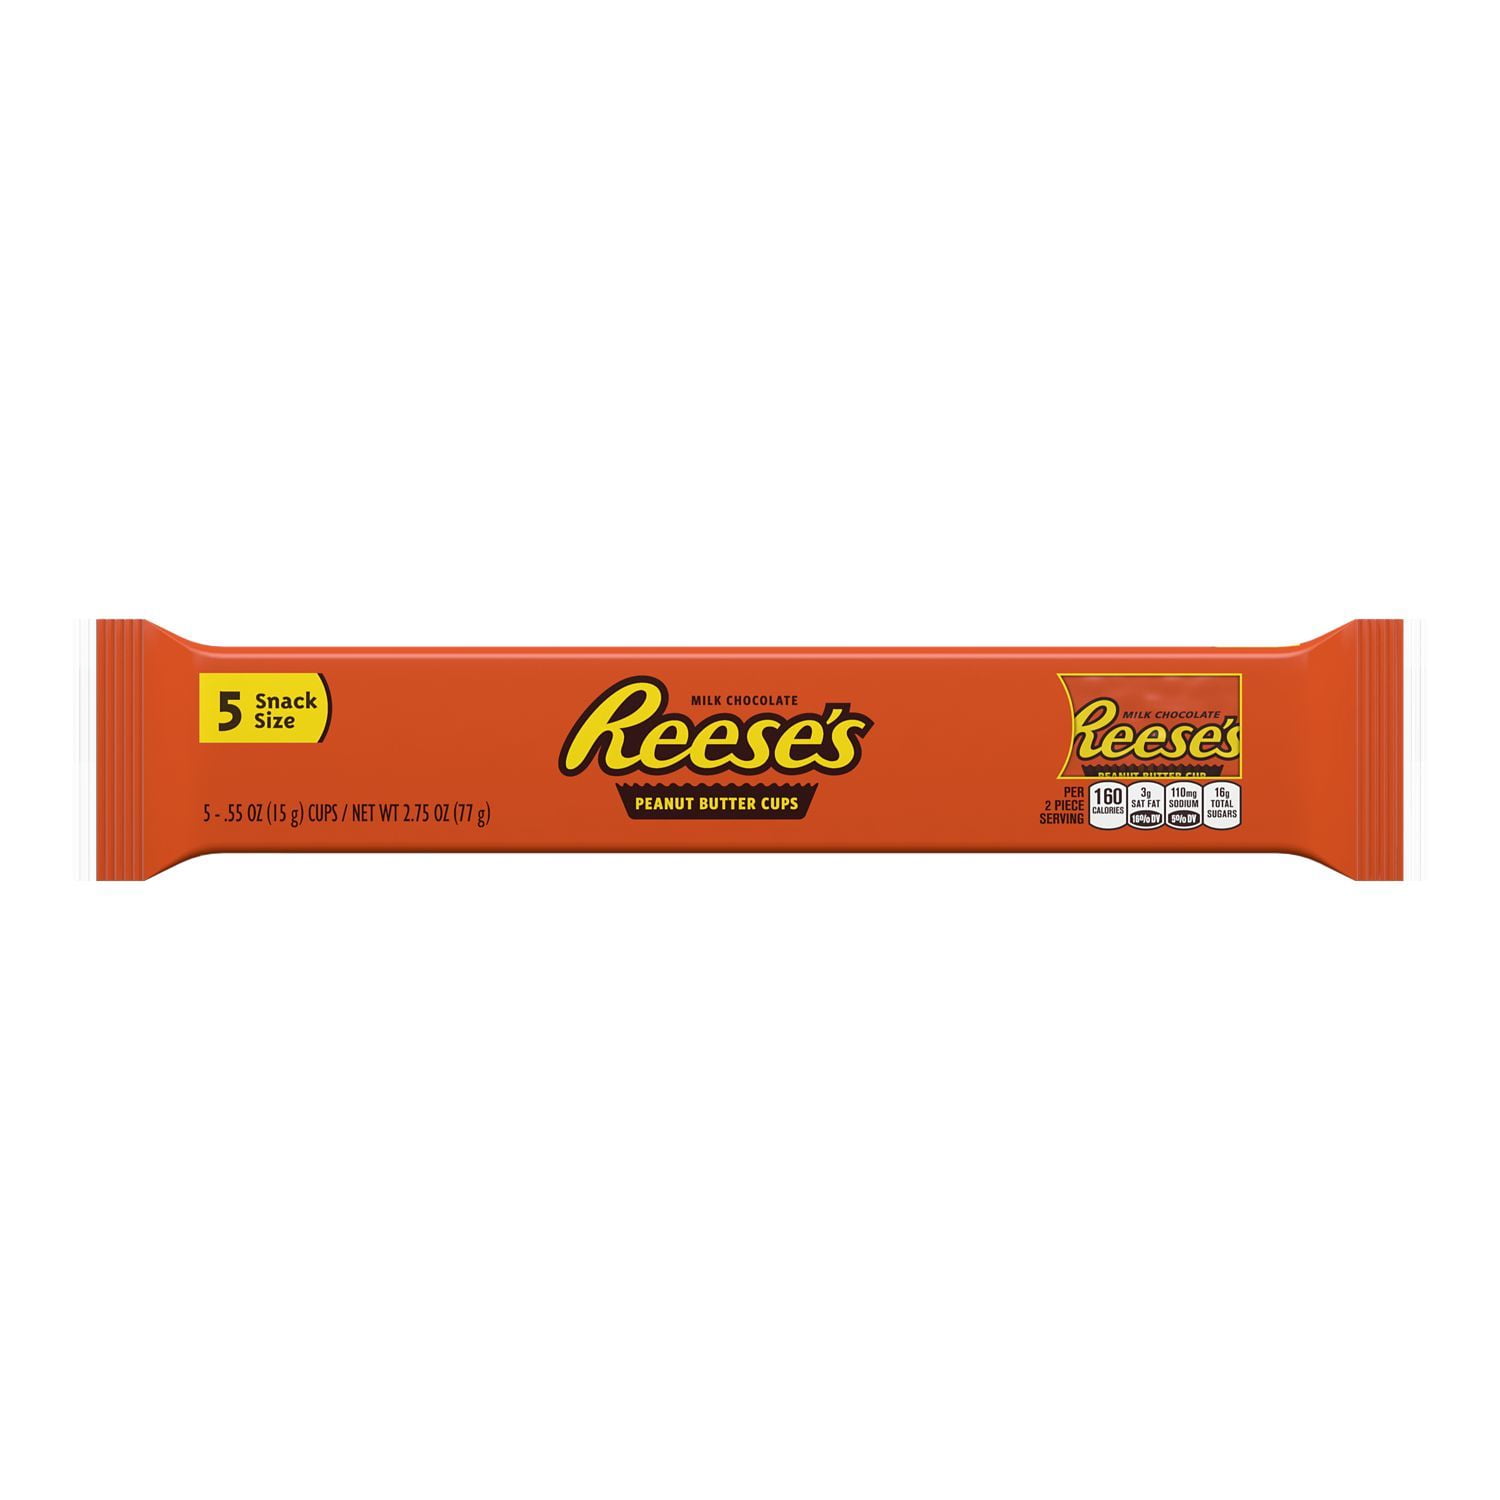 Reese's, Milk Chocolate Peanut Butter Cups Snack Size Candy, Gluten Free, Individually Wrapped, 0.55 oz, Pack 5 Ct